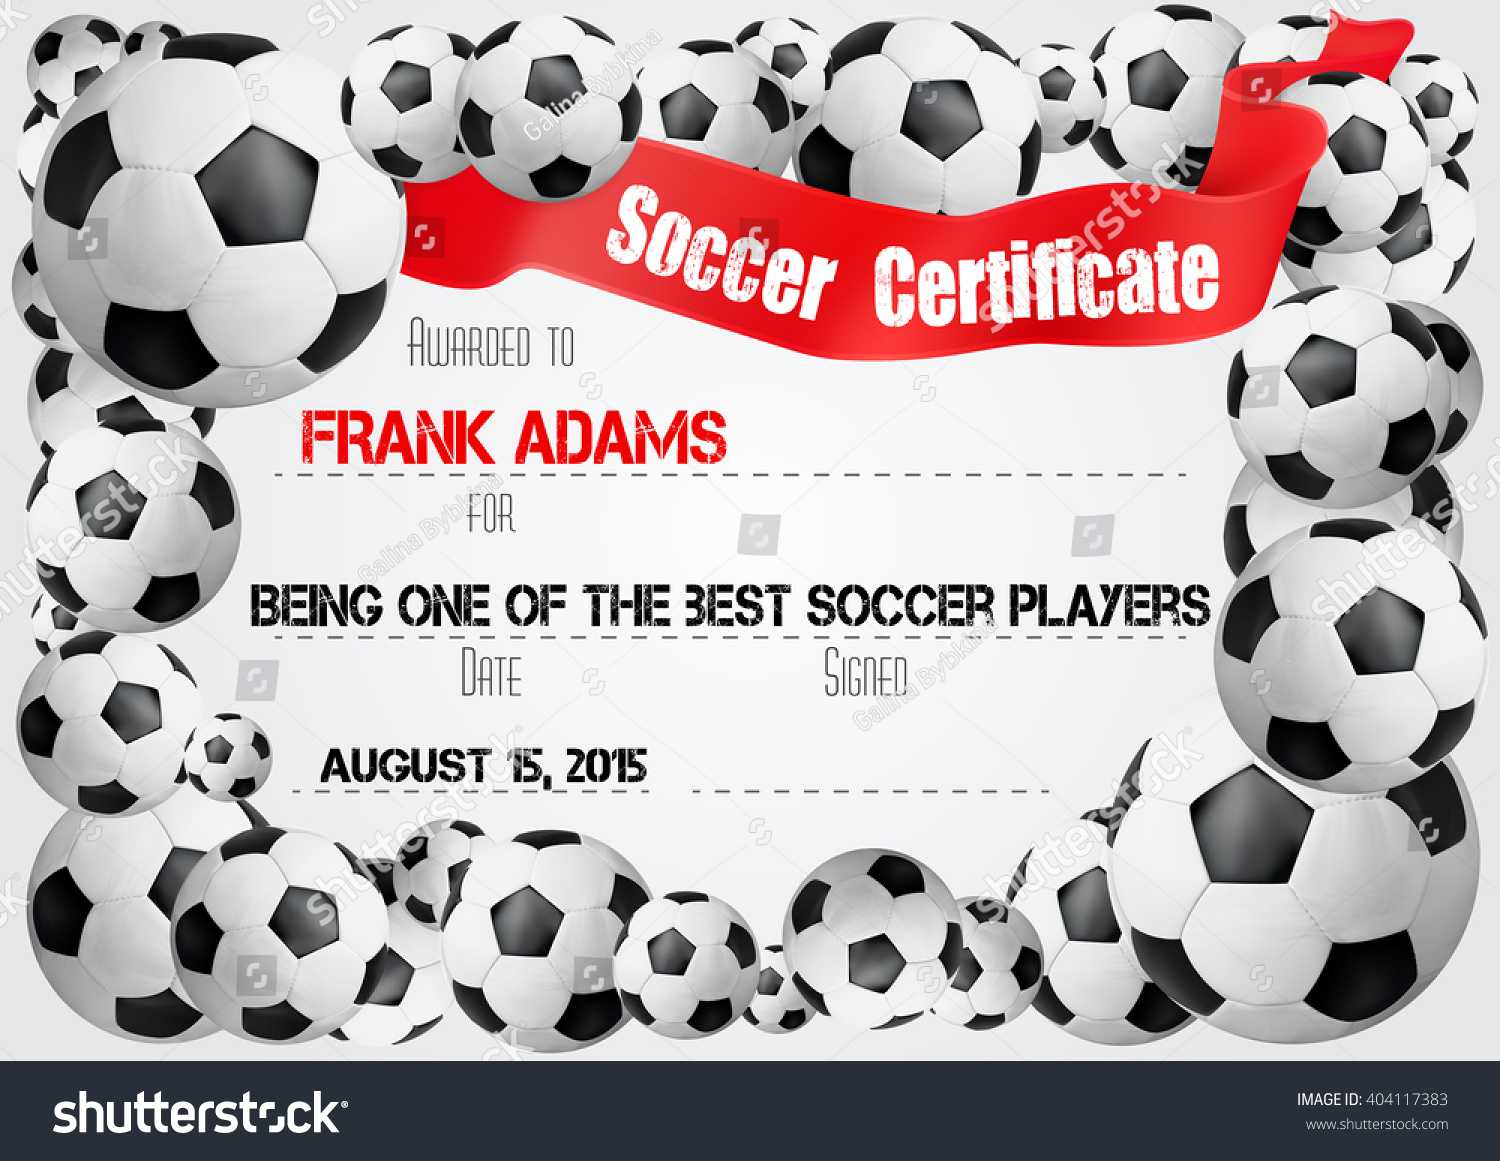 Royalty Free Soccer Certificate Stock Images, Photos For Soccer Certificate Template Free